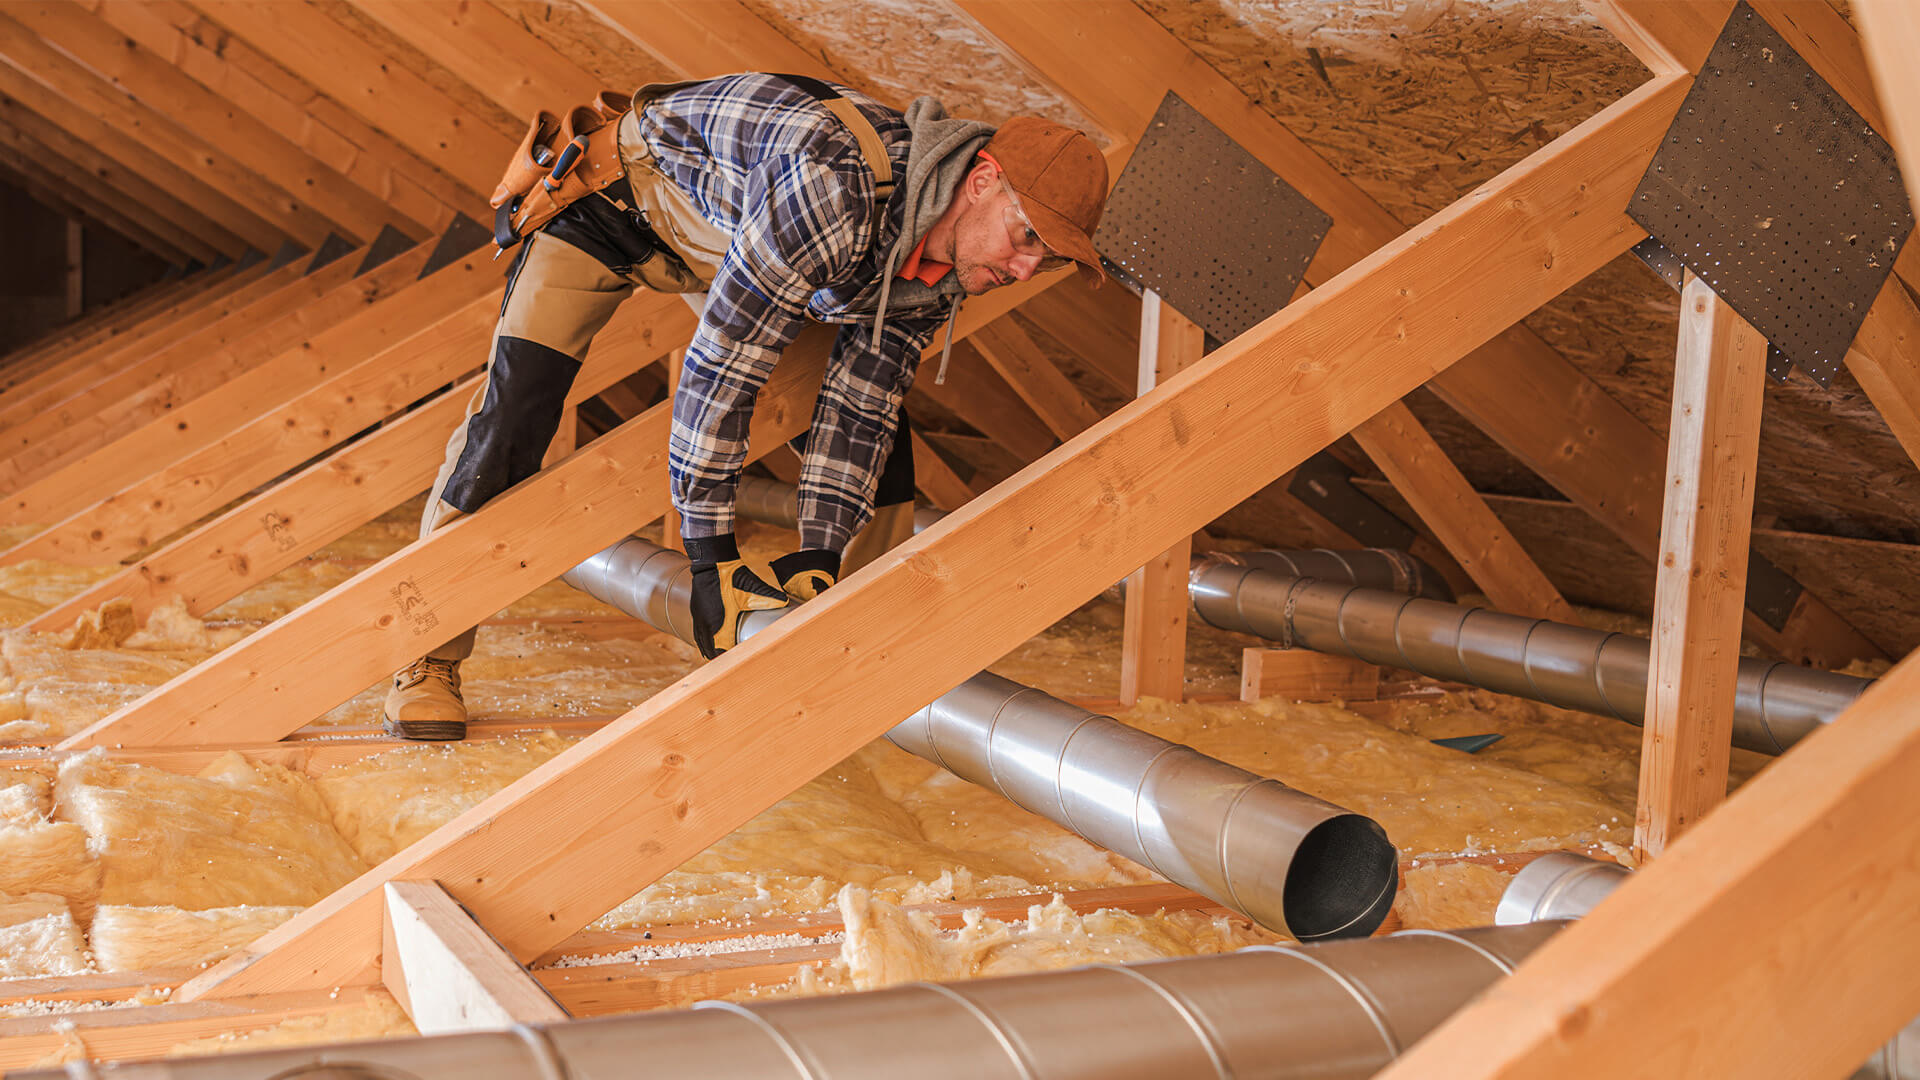 Man installing ventilation tubes in a home's attic